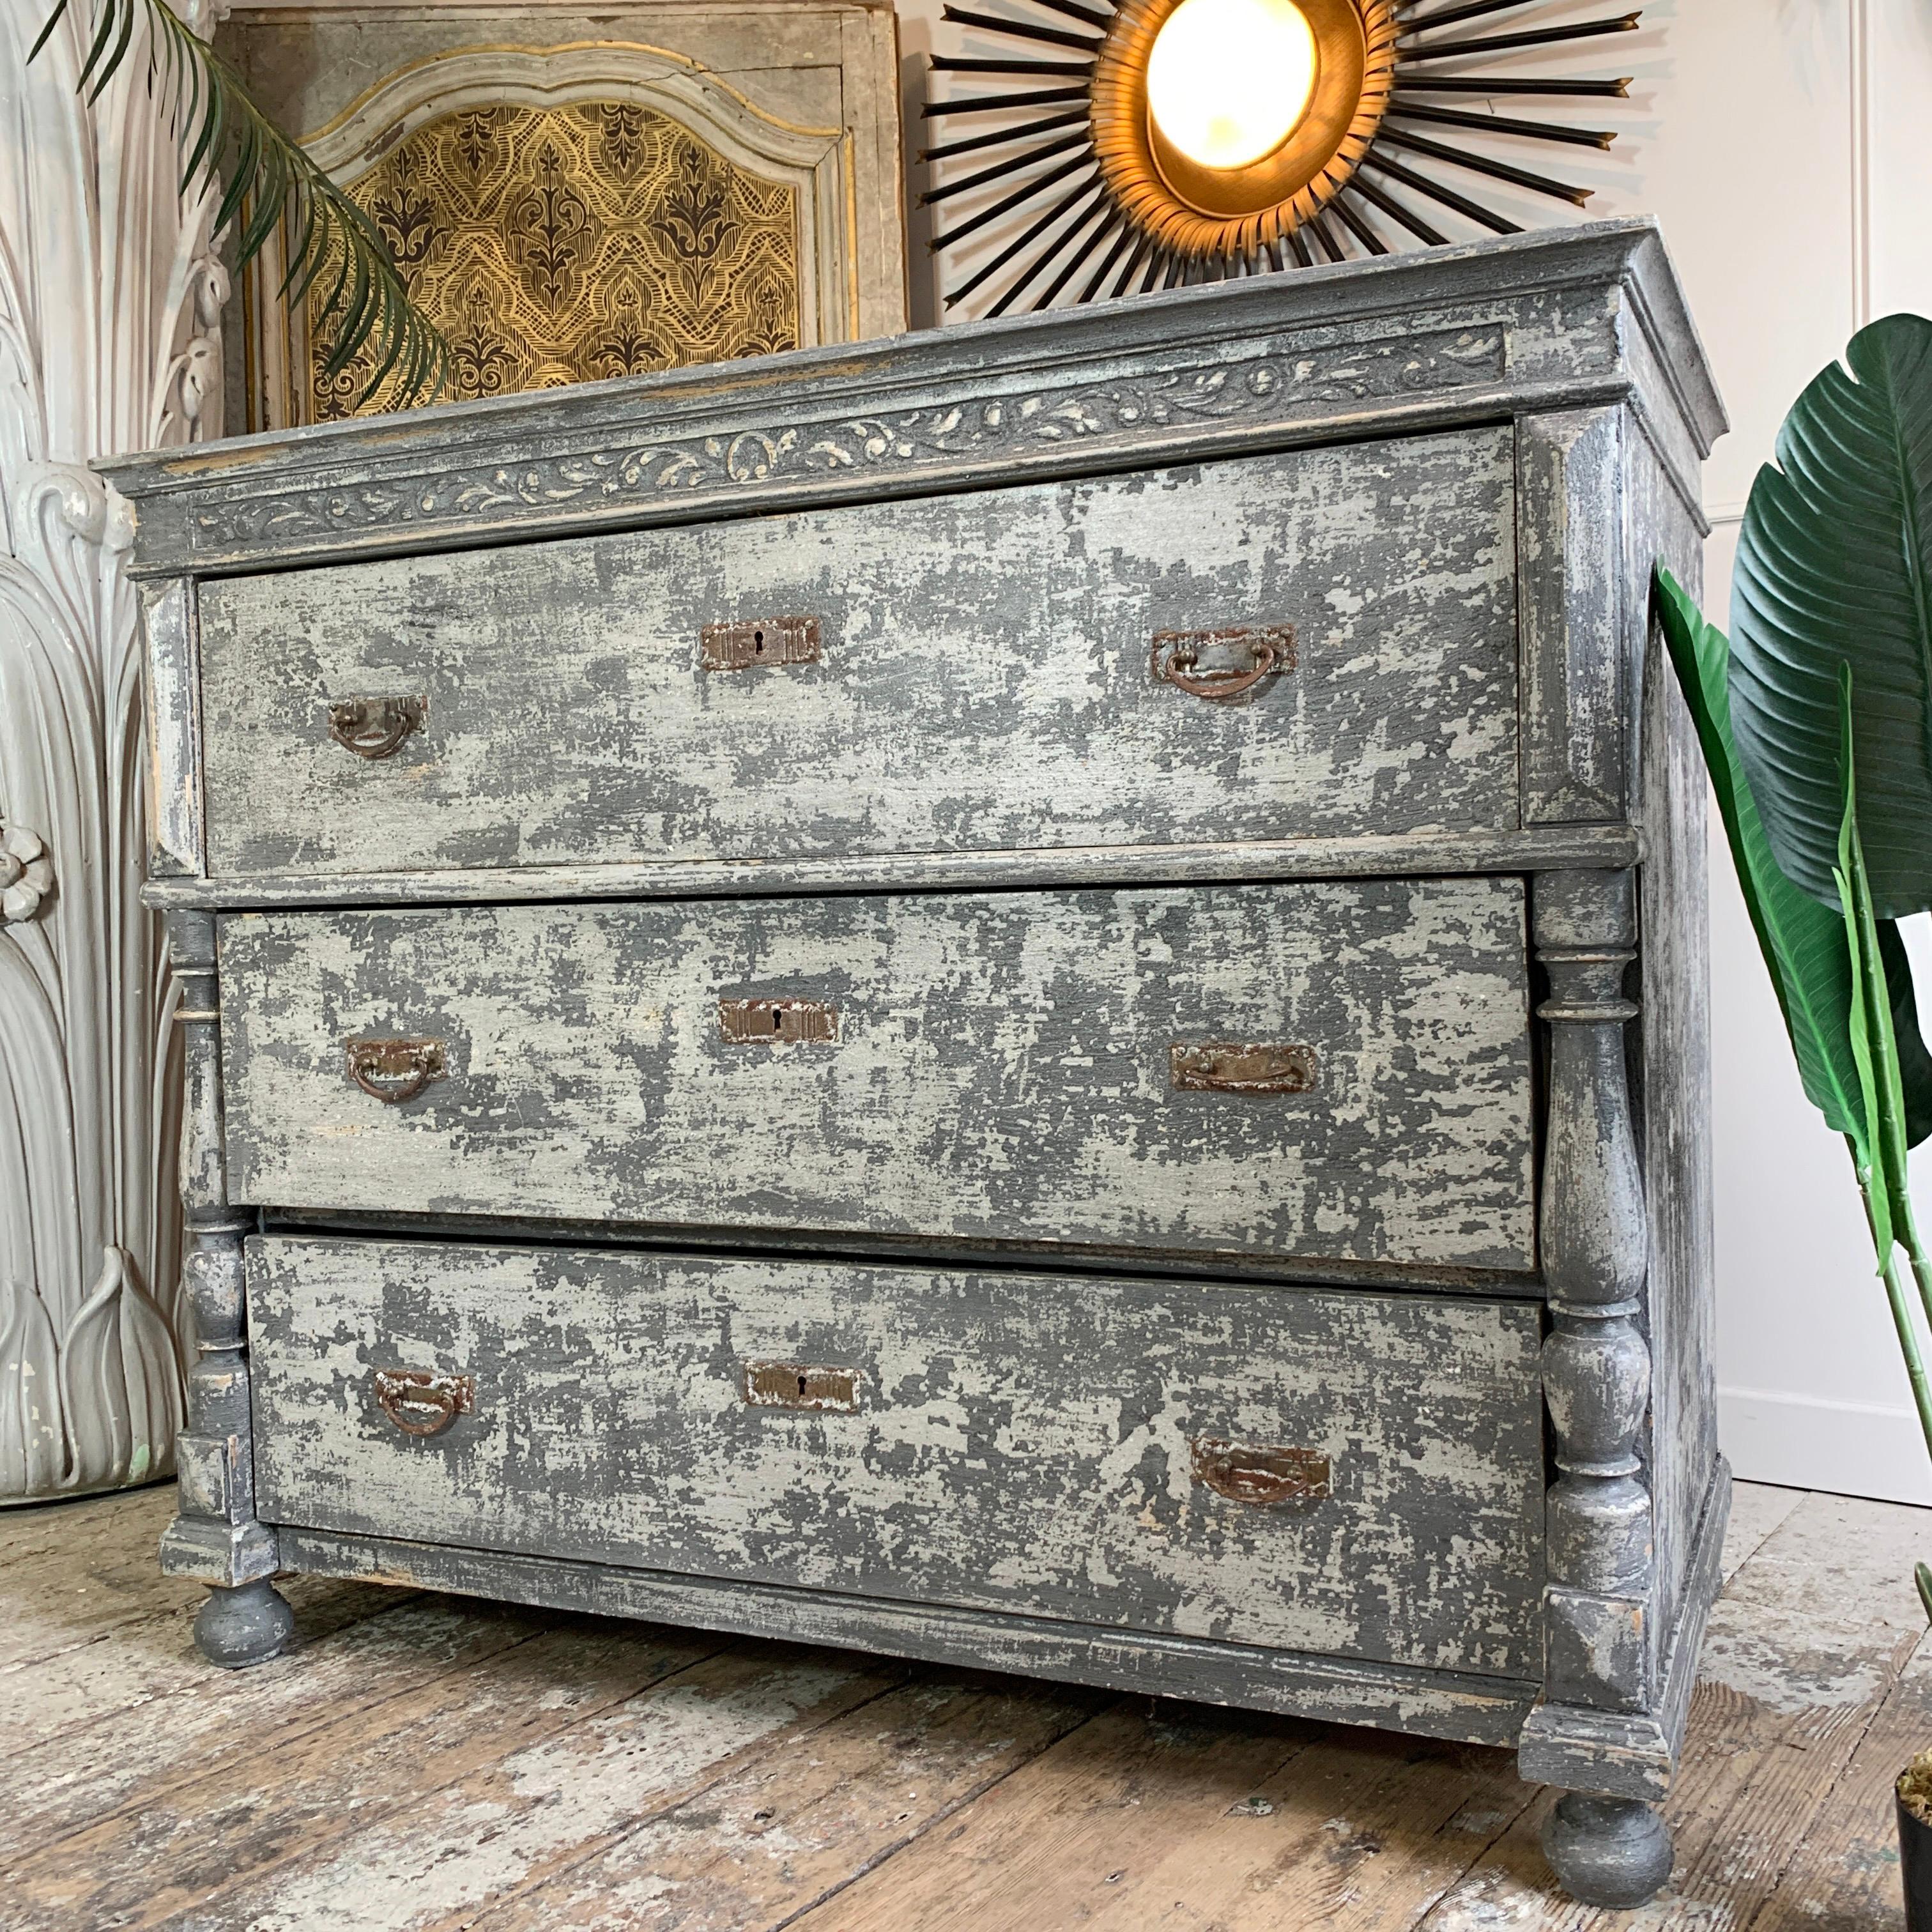 Large French Chest Of Drawers
Fantastic Large Scale Set Of Drawers
France 1930'S
Grey Paint Finish
3 Drawers With Handles To Each Side, Original Locks In Place But No Longer Functional
127Cm Width, 63.5Cm Depth, 105Cm Height. Drawer Height Approx